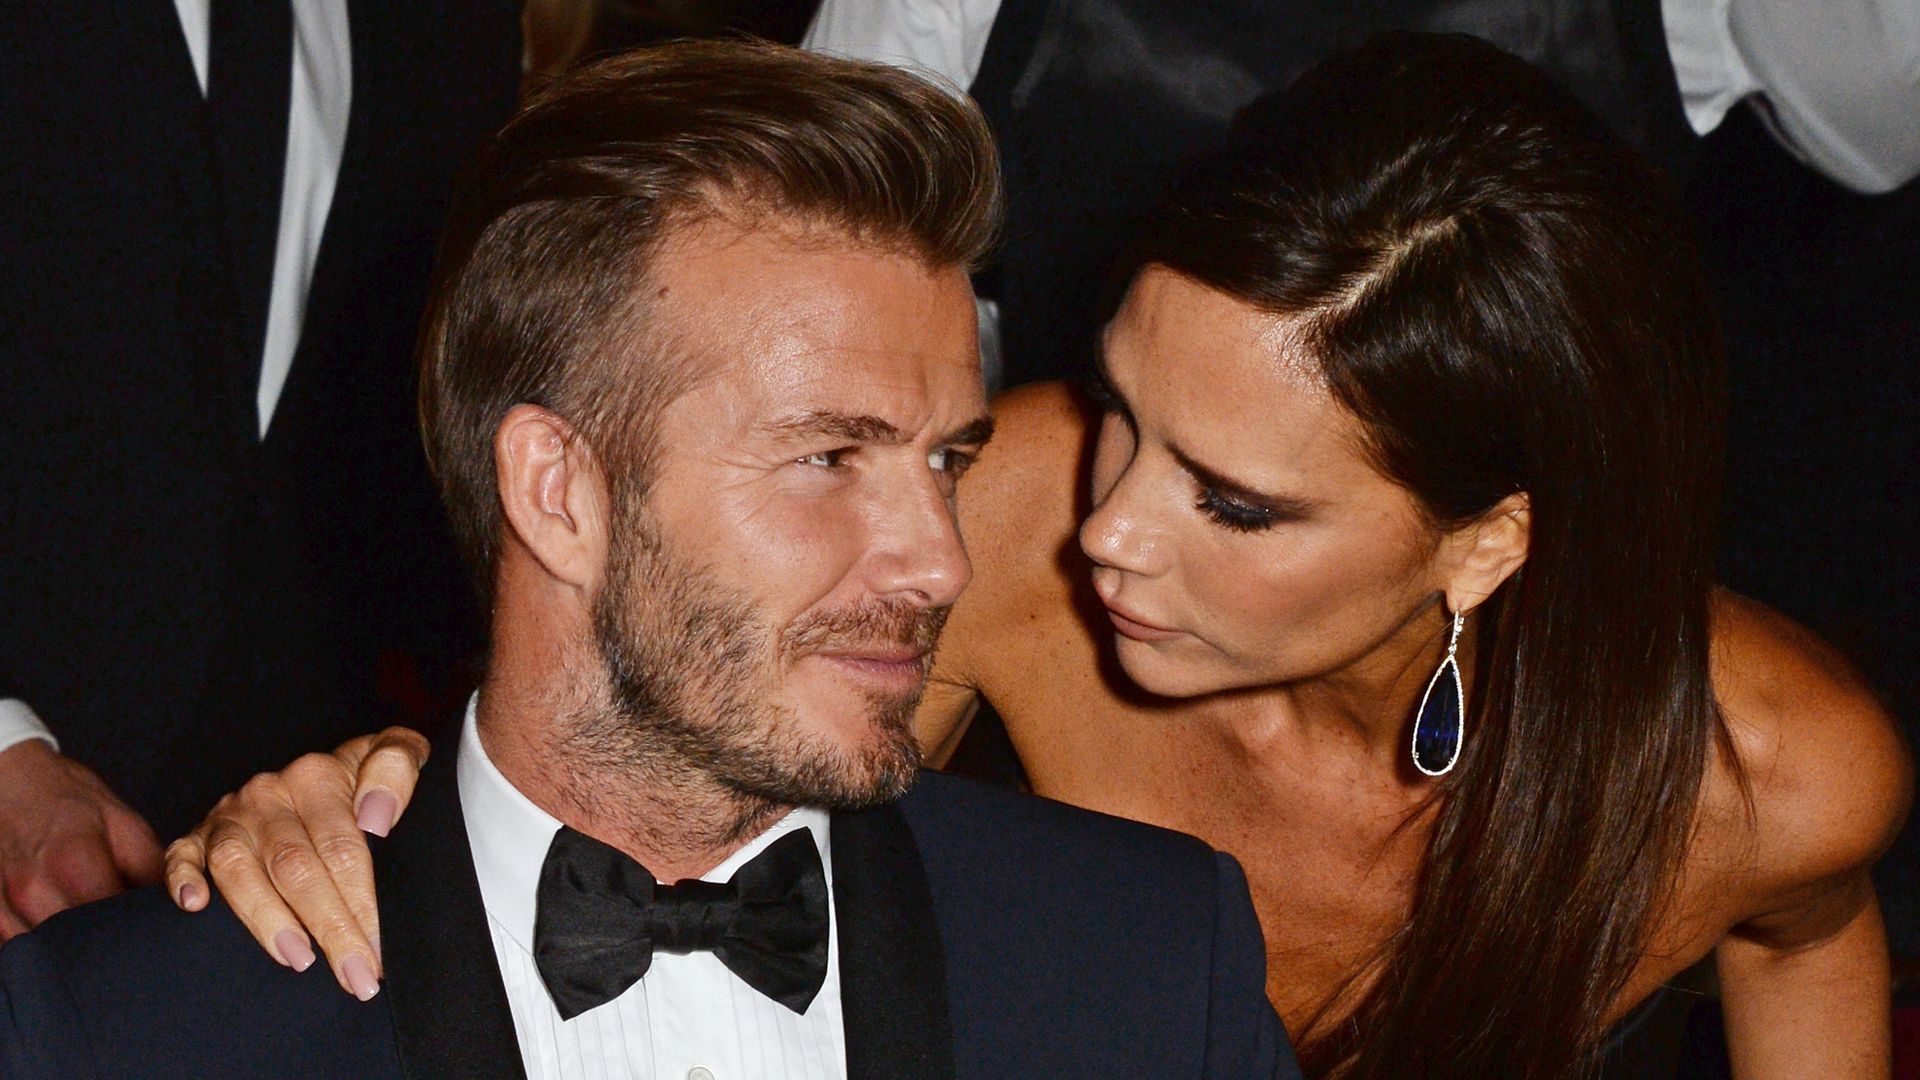 avid Beckham (L) and Victoria Beckham attend an after party following the 60th London Evening Standard Theatre Awards at the London Palladium on November 30, 2014 in London, England. 